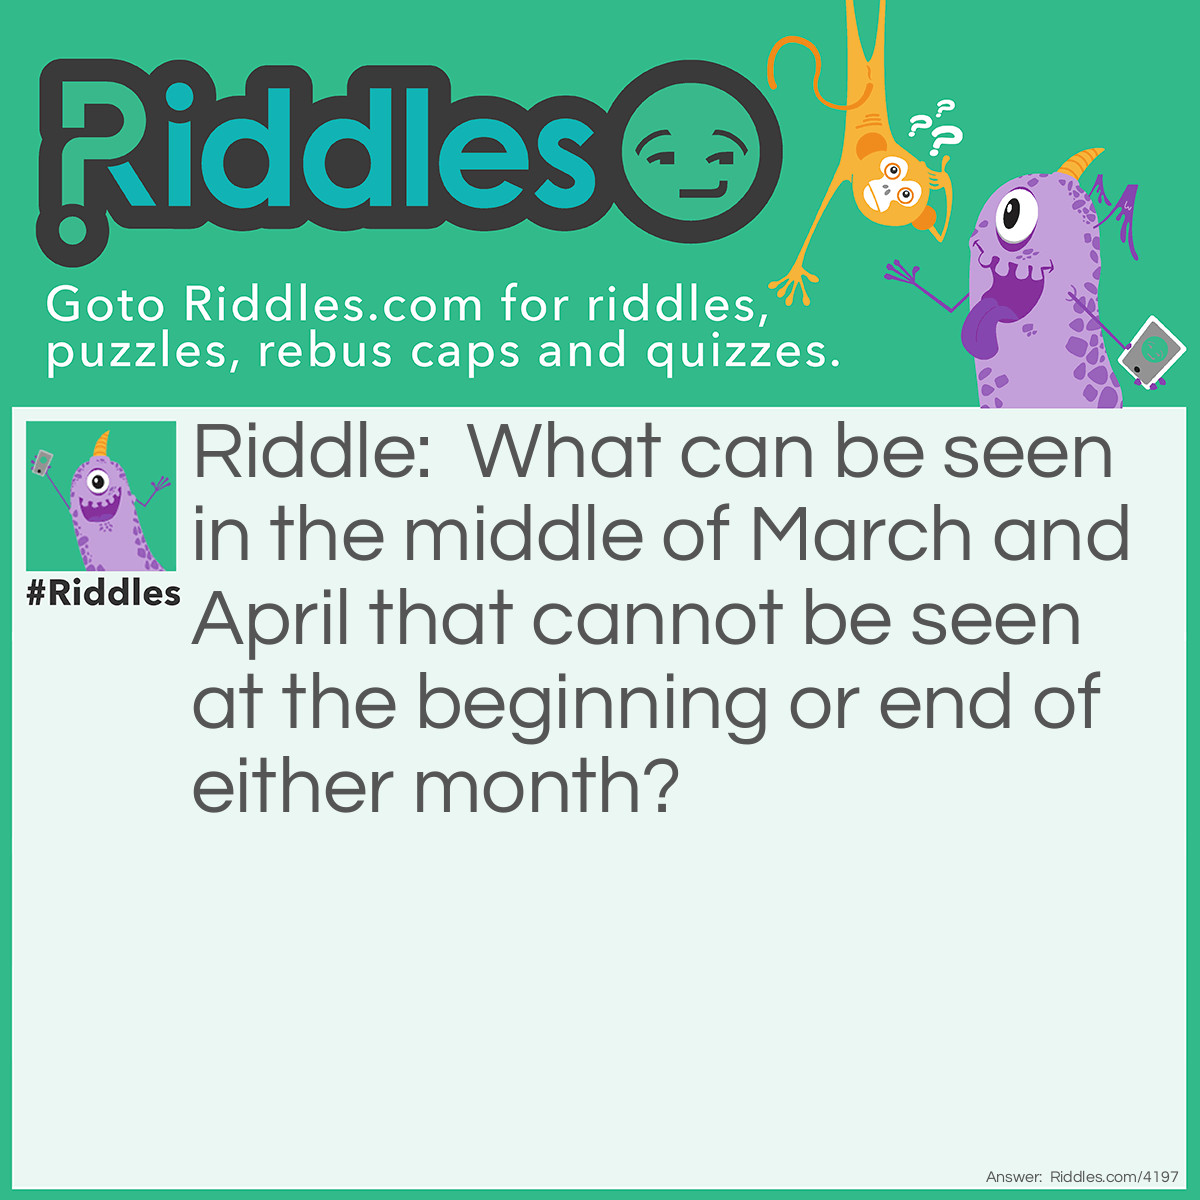 Riddle: What can be seen in the middle of March and April that cannot be seen at the beginning or end of either month? Answer: The letter 'r'.